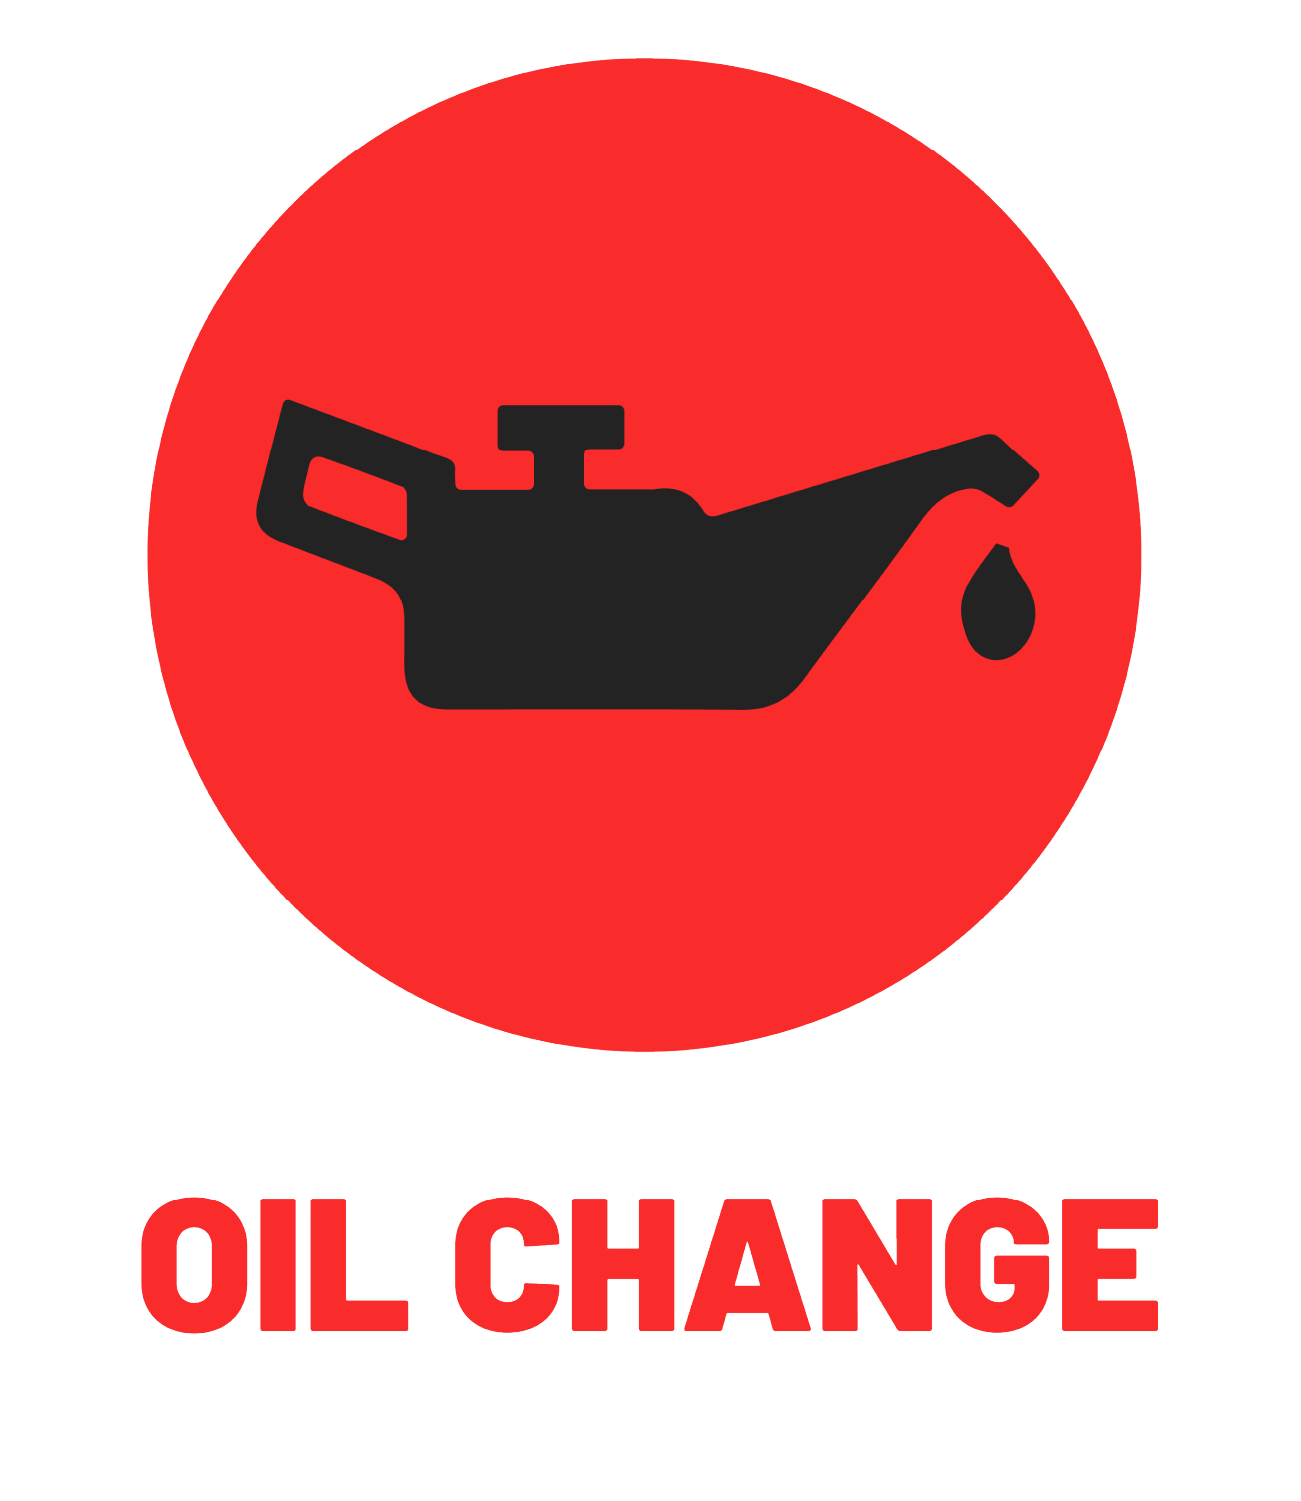 Learn more about oil changes